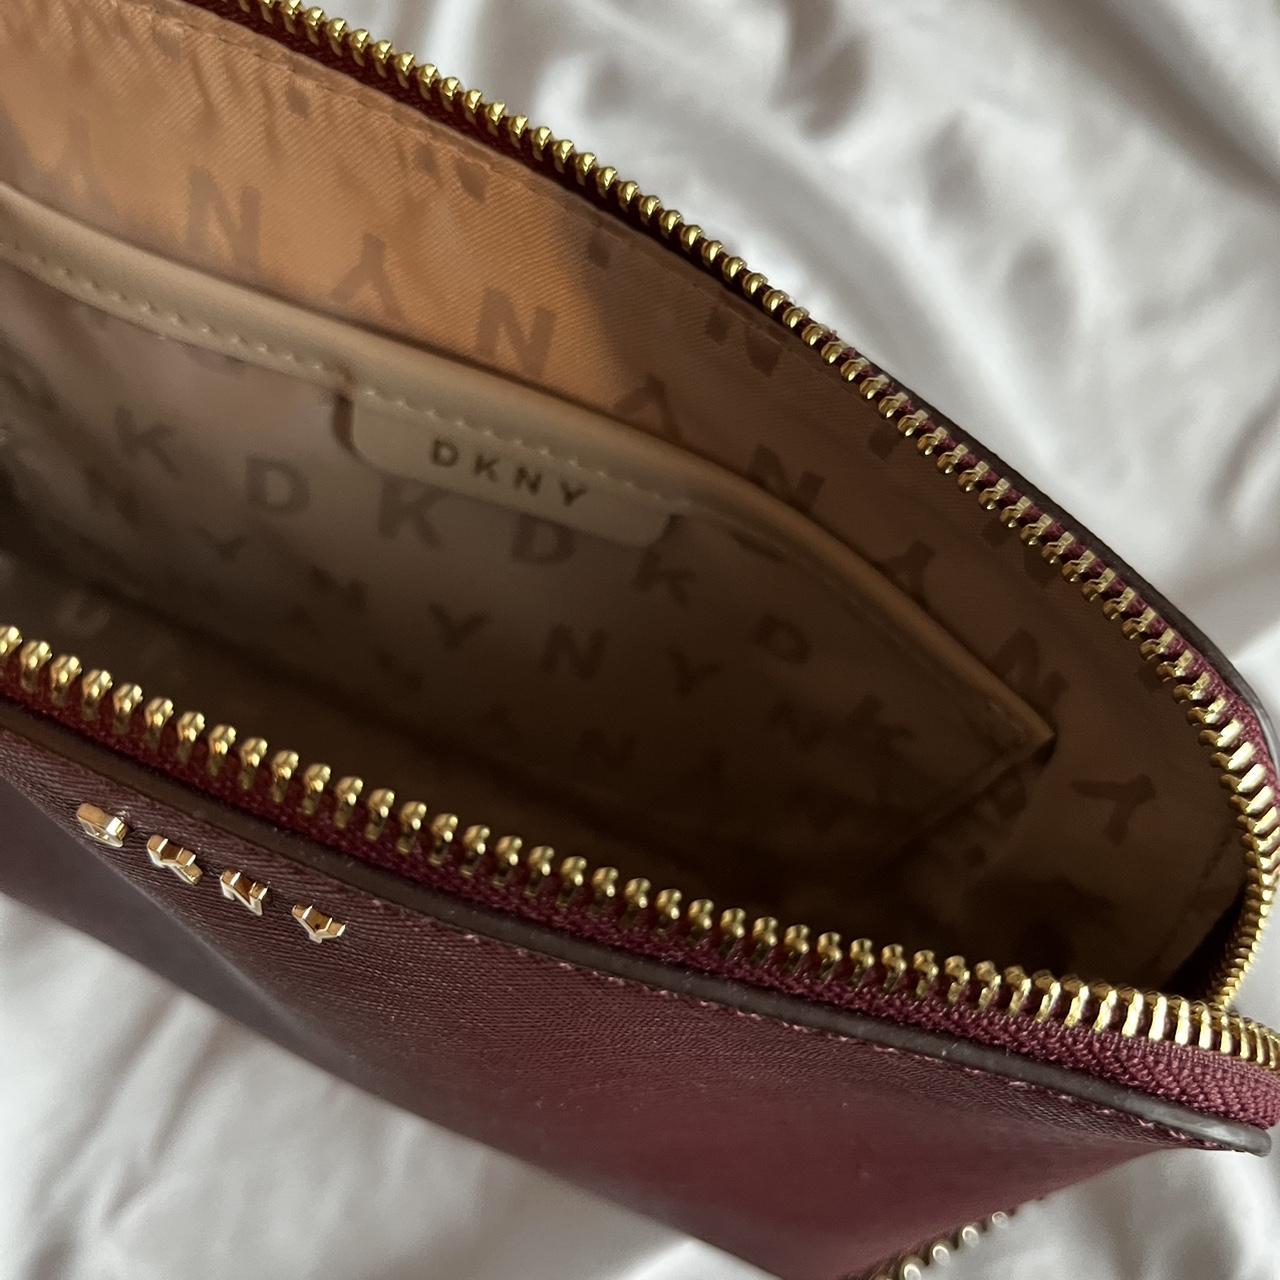 DKNY Women's Burgundy and Gold Bag (3)